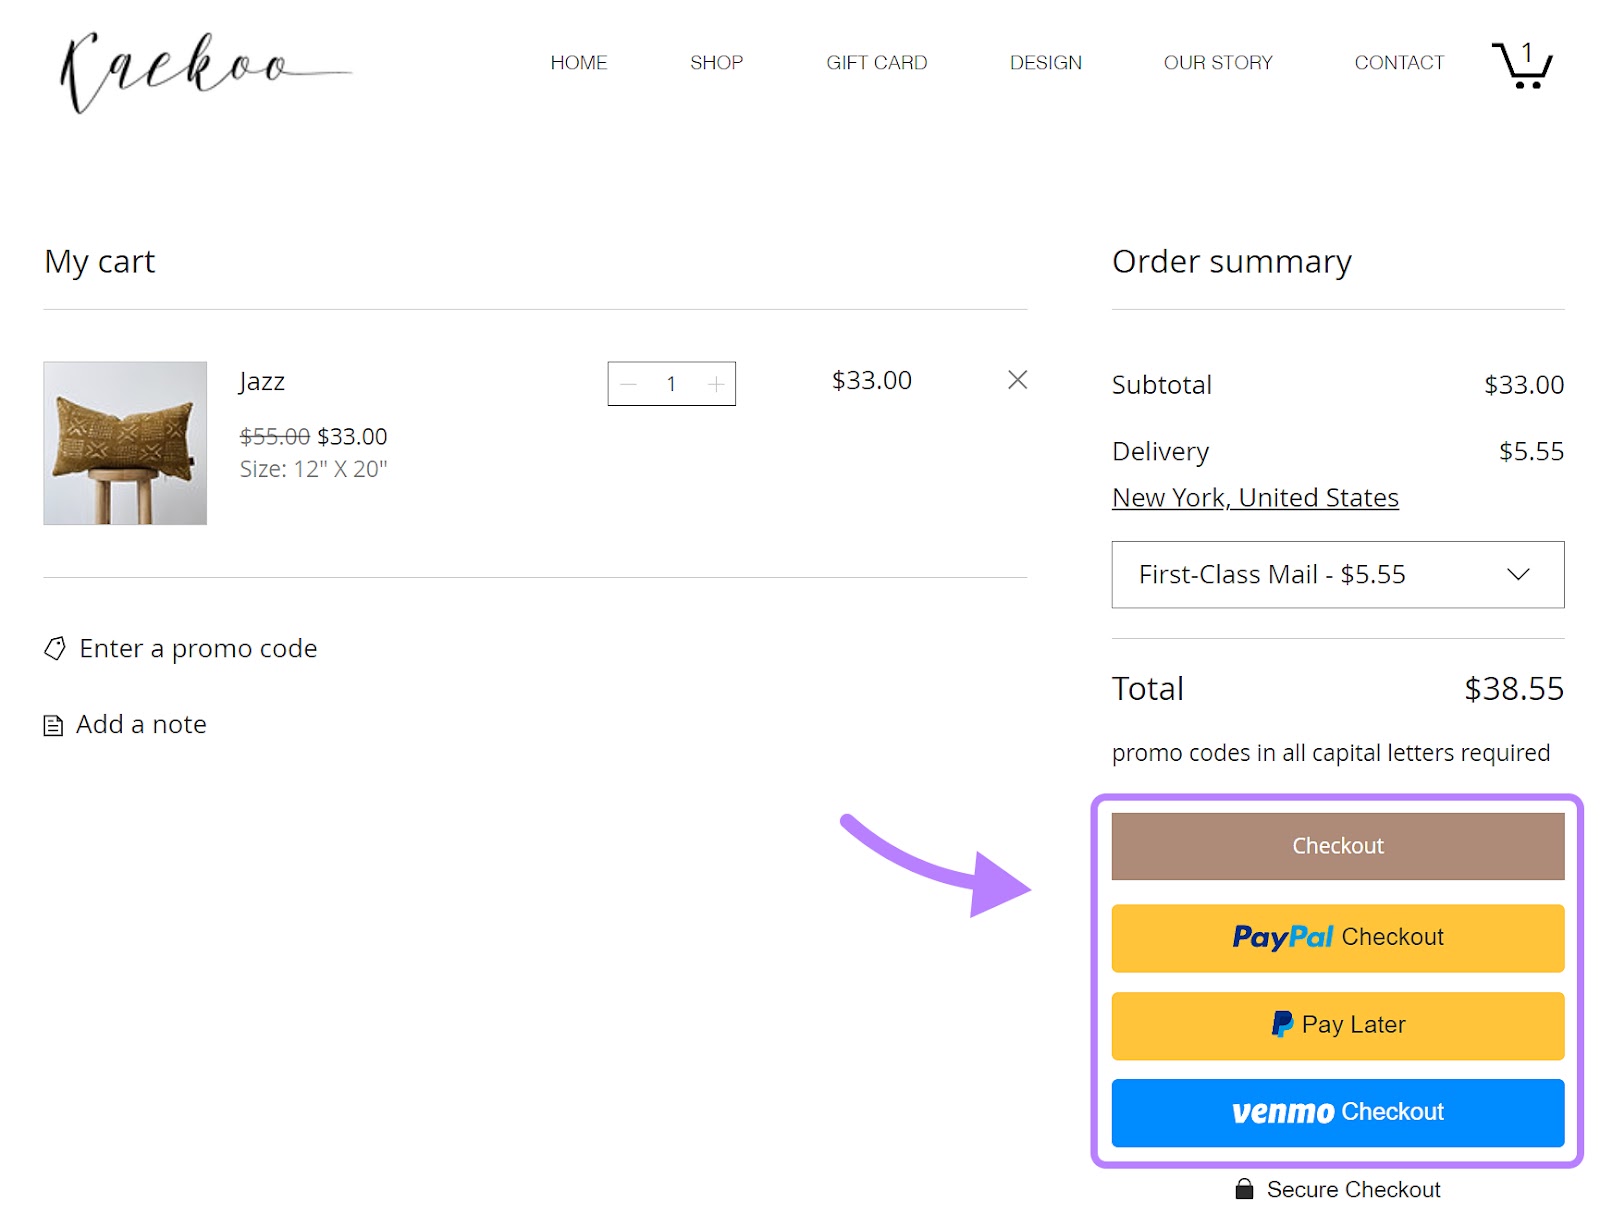 Wix eCommerce outgo   gateways, including checkout, paypal checkout, wage  later, and venmo checkout options